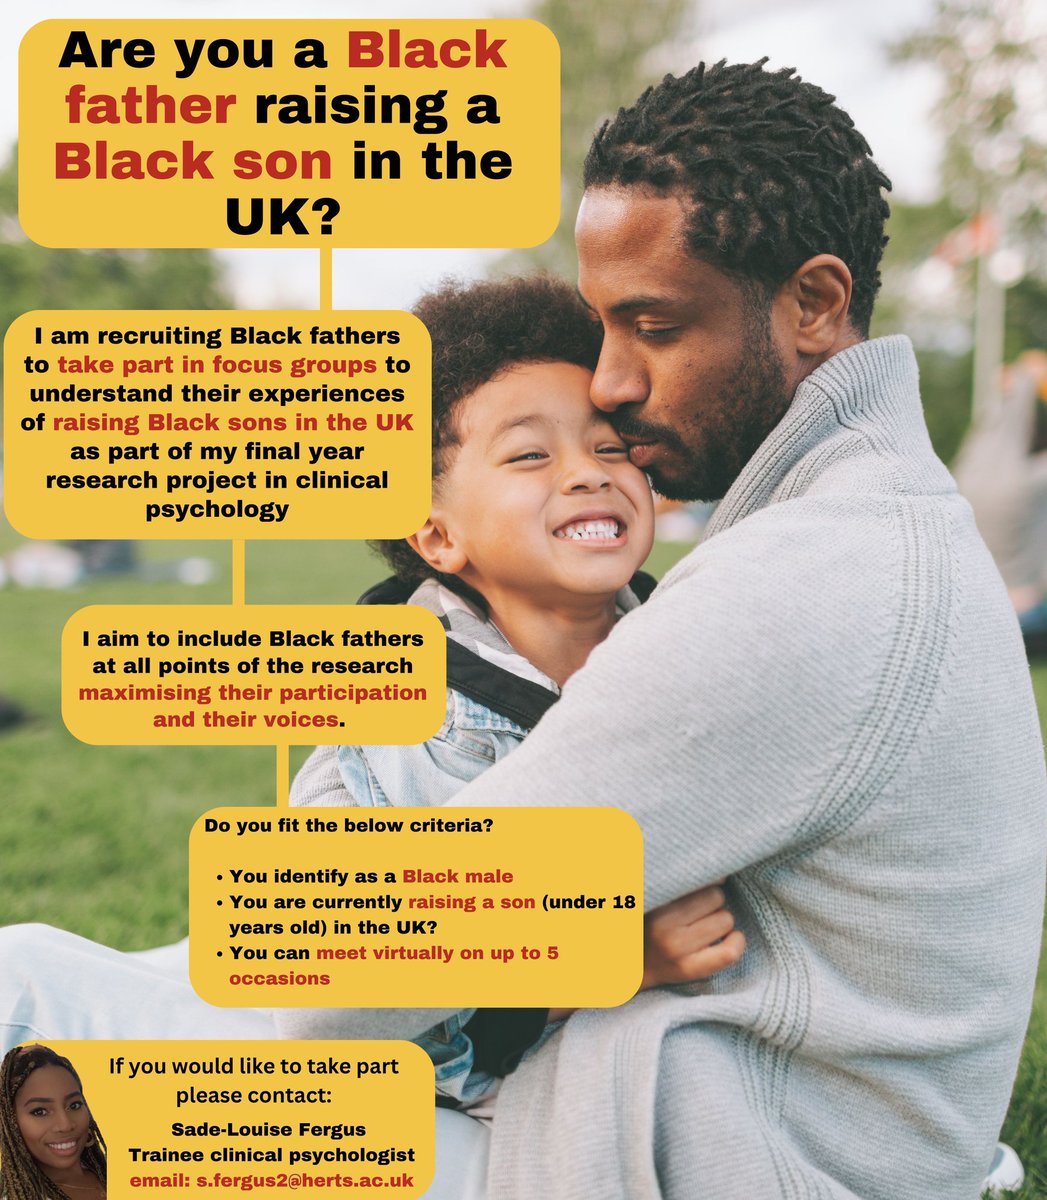 Hey guys, #Speakblackman is partnering with Trainee Clinical Psychologist Sade-Louise Fergus of the University of Hertfordshire to conduct a research on raising black sons in the UK. We are hoping to recruit Black fathers for this research project. @ShardsPsych